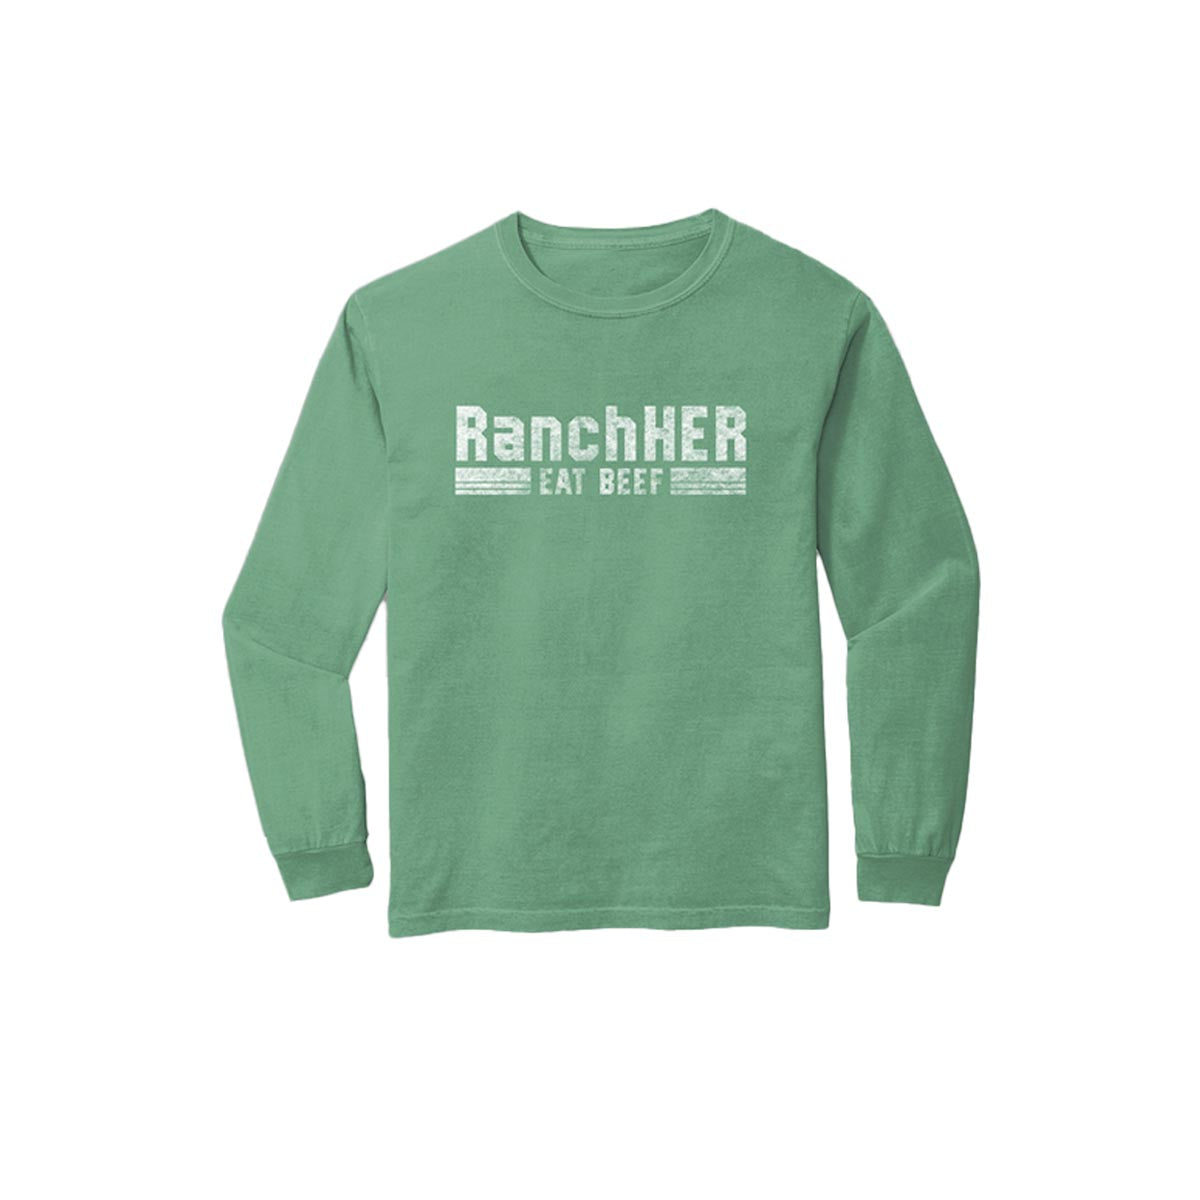 "Eat Beef" RanchHER Classic Long Sleeve